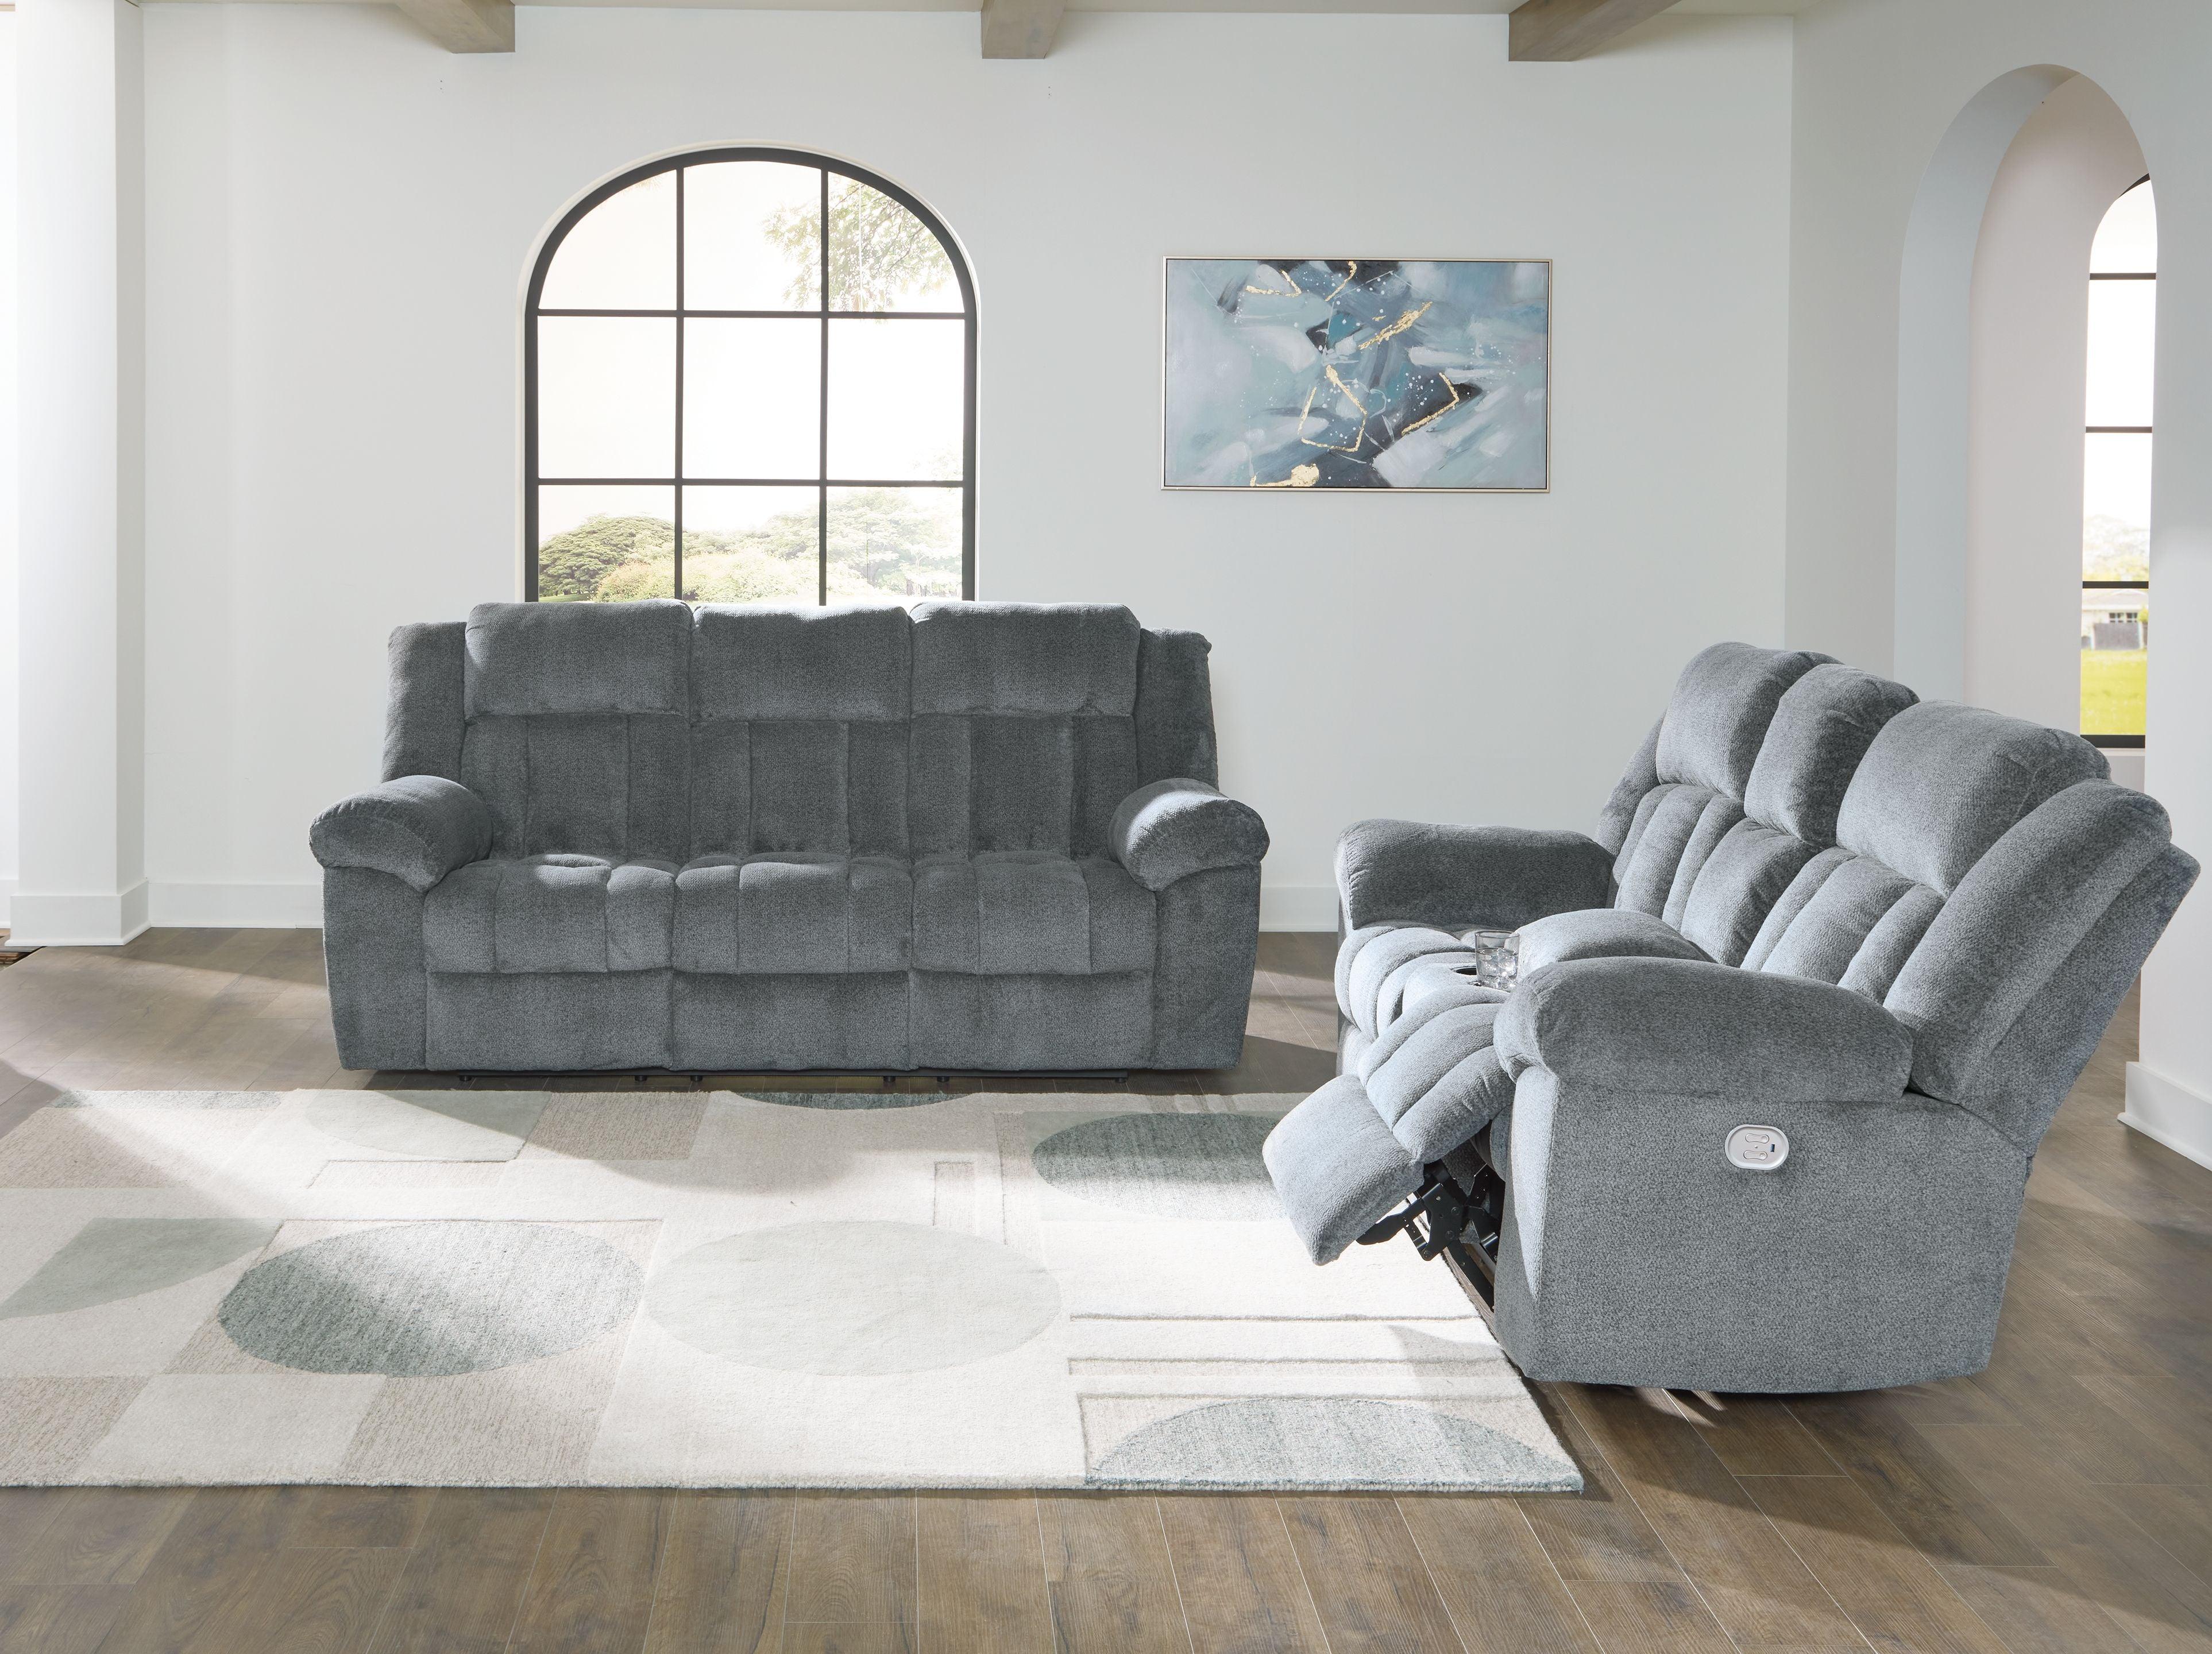 Signature Design by Ashley® - Tip-off - Reclining Living Room Set - 5th Avenue Furniture